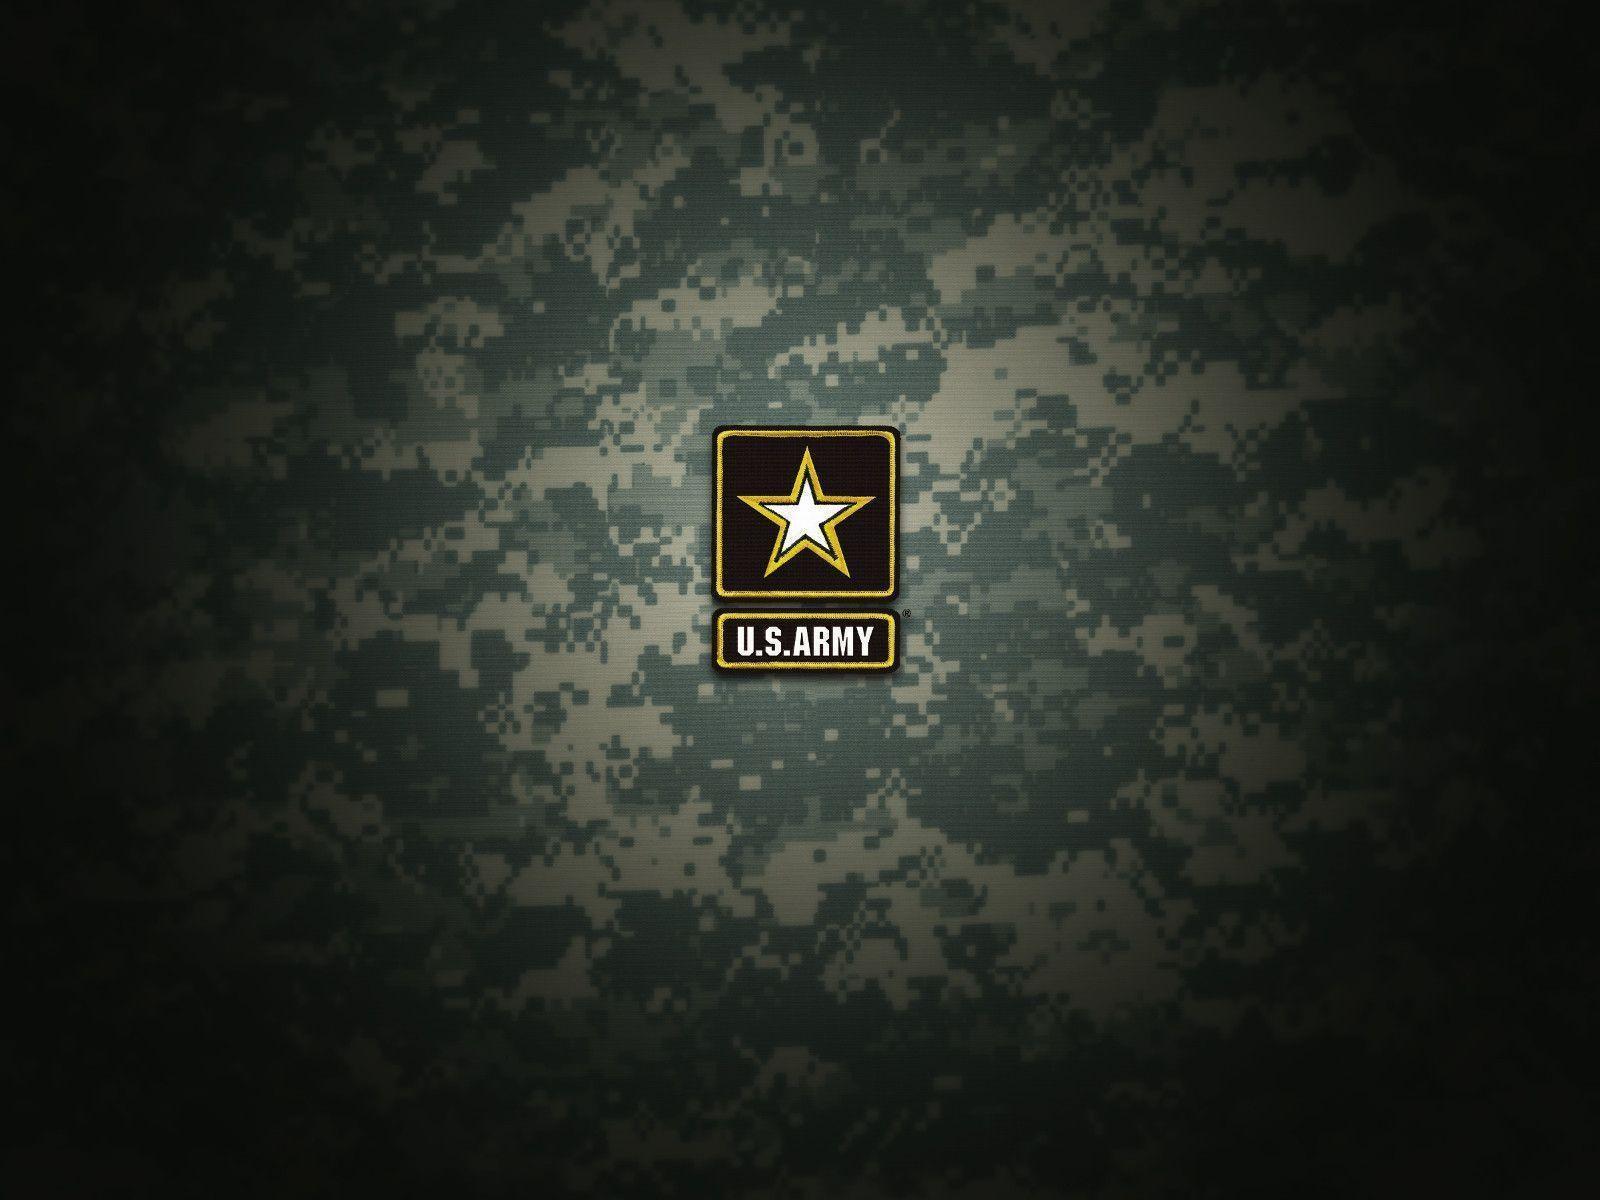 US Army Wallpaper Backgrounds 1600x1200